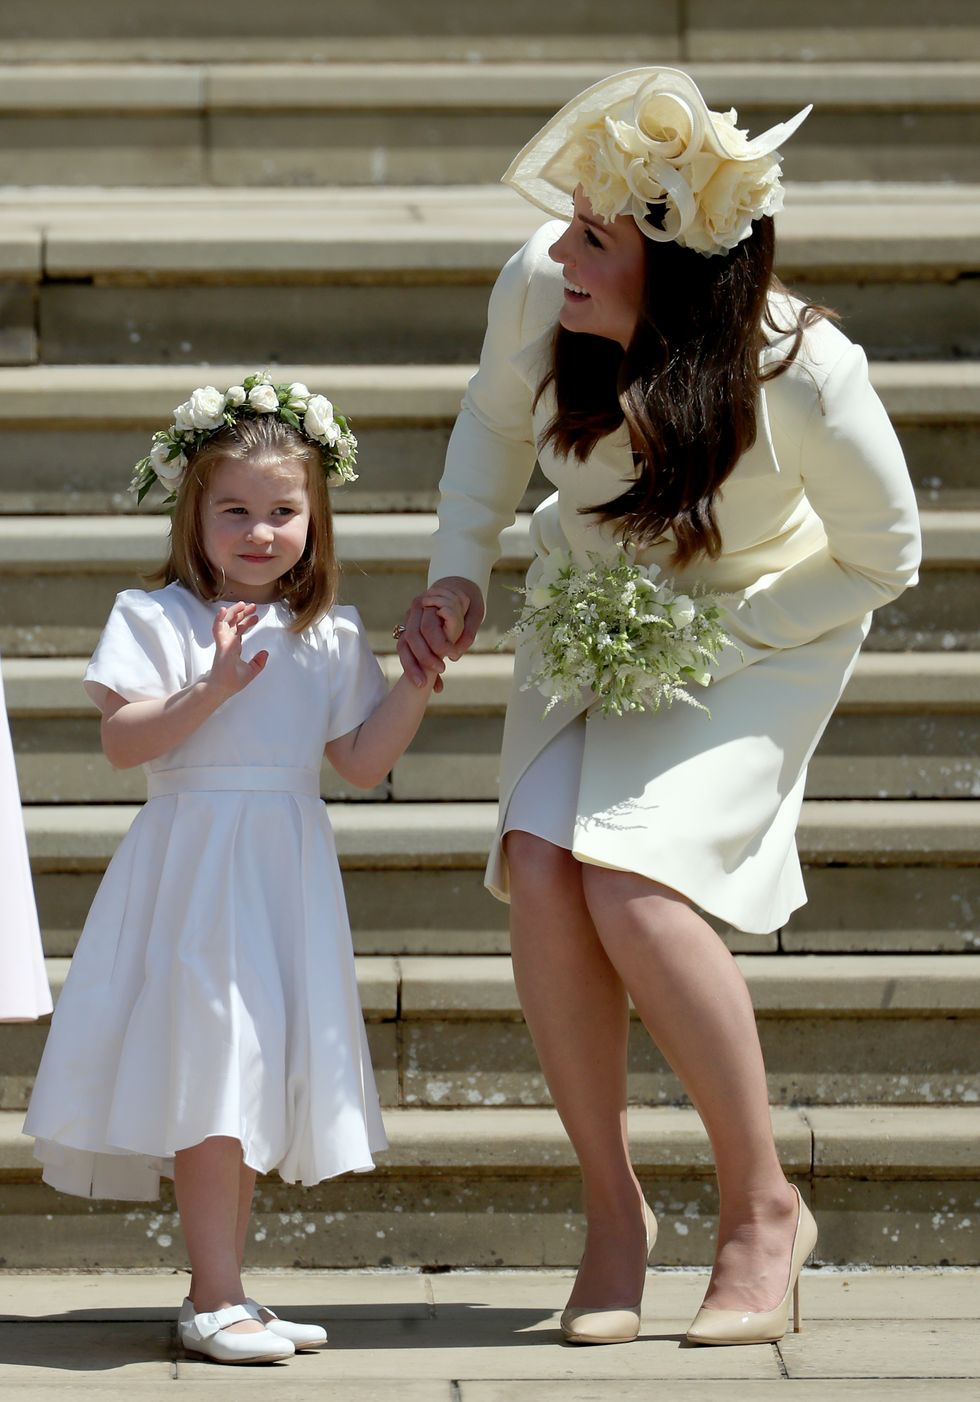 kate middleton and princess charlotte during meghan markle and prince harry's wedding﻿